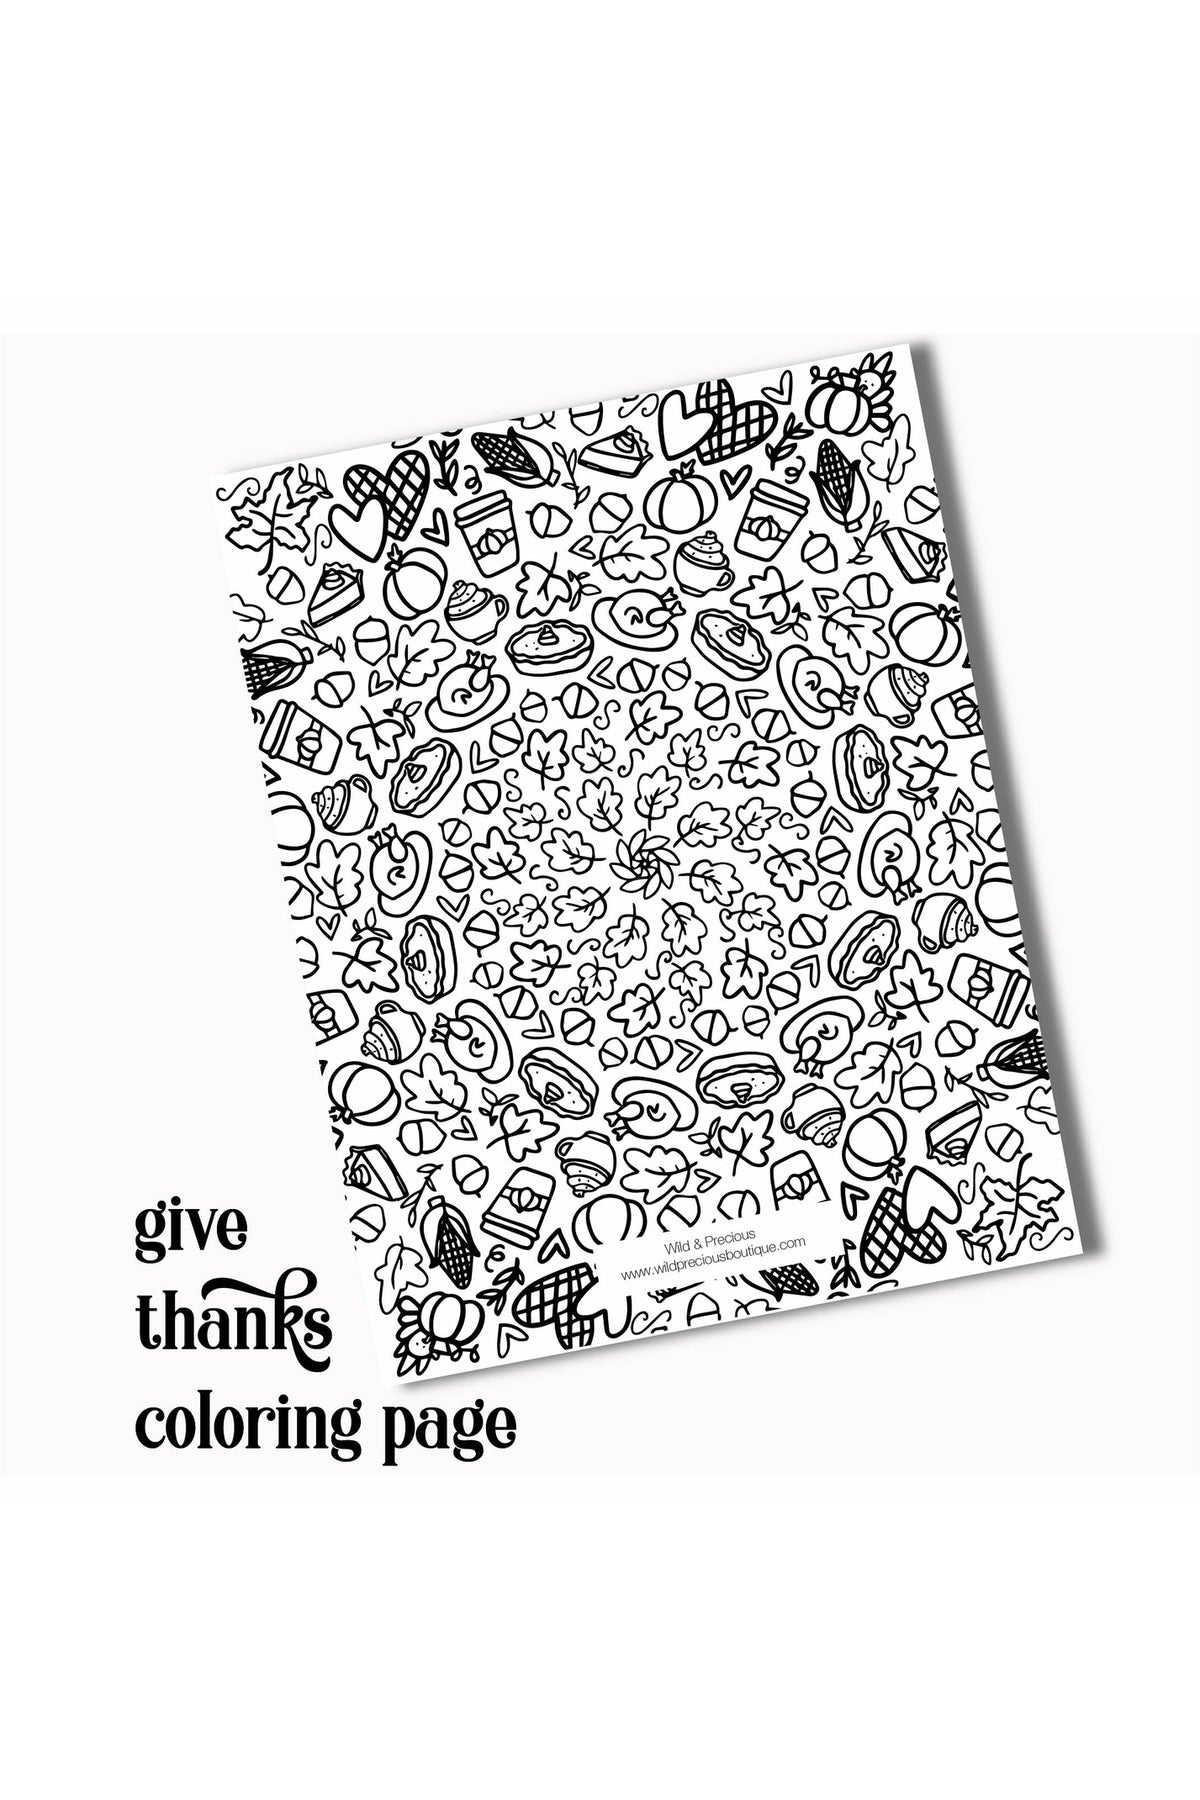 Giving Thanks Coloring Page